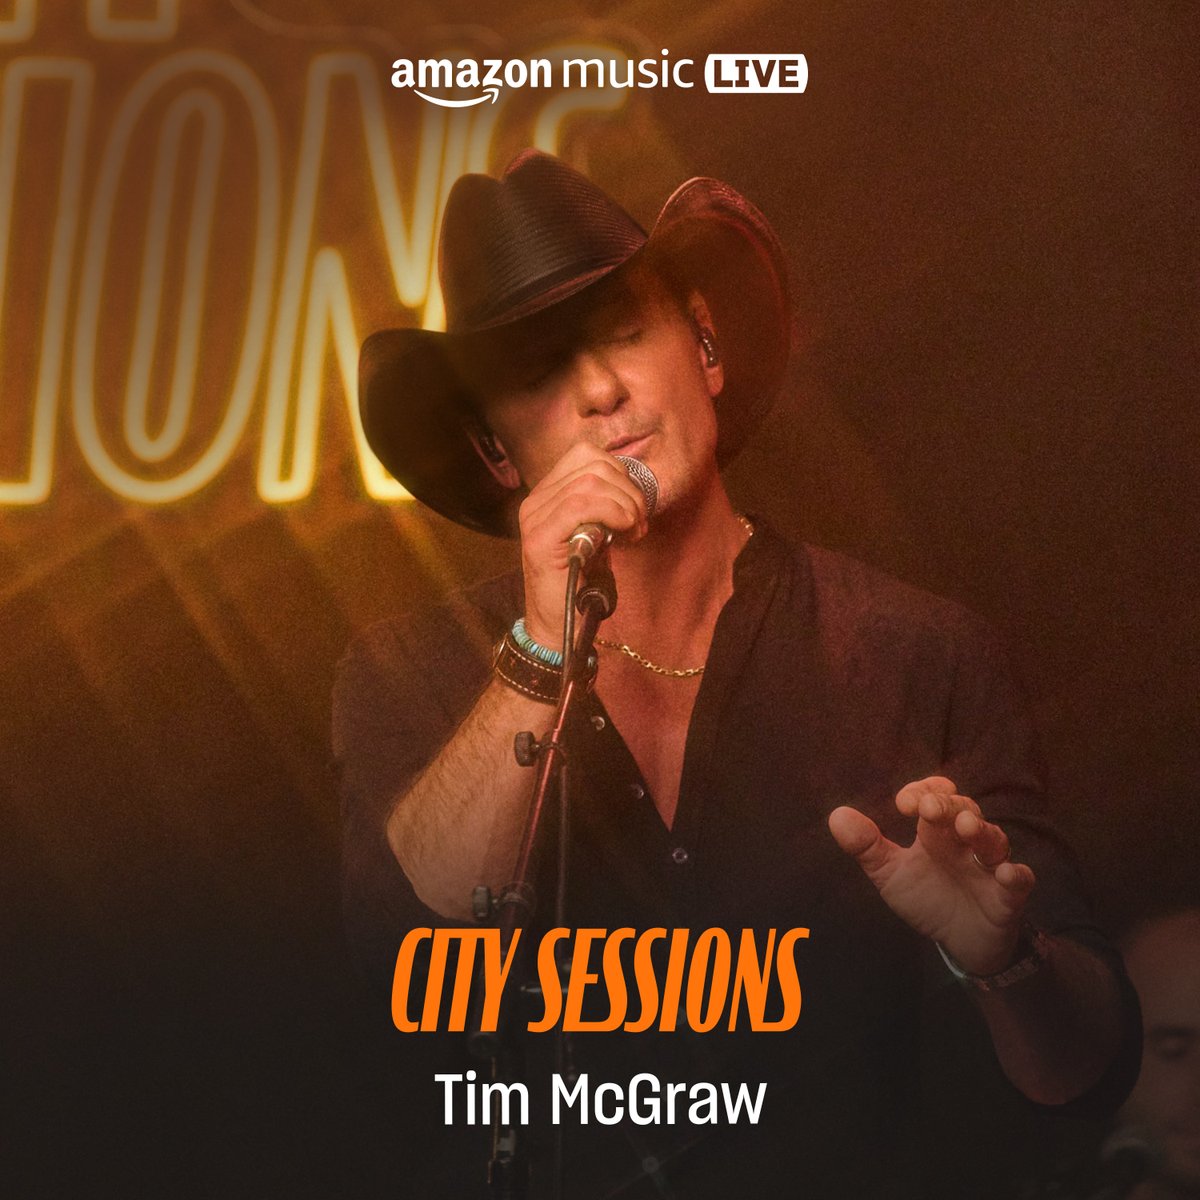 A couple months ago we took the band to Brooklyn for a special performance for Amazon Music Live City Sessions… and we recorded it!! Listen to all 4 songs out now only on @amazonmusic: Tim-McGraw.lnk.to/CitySessionsTP